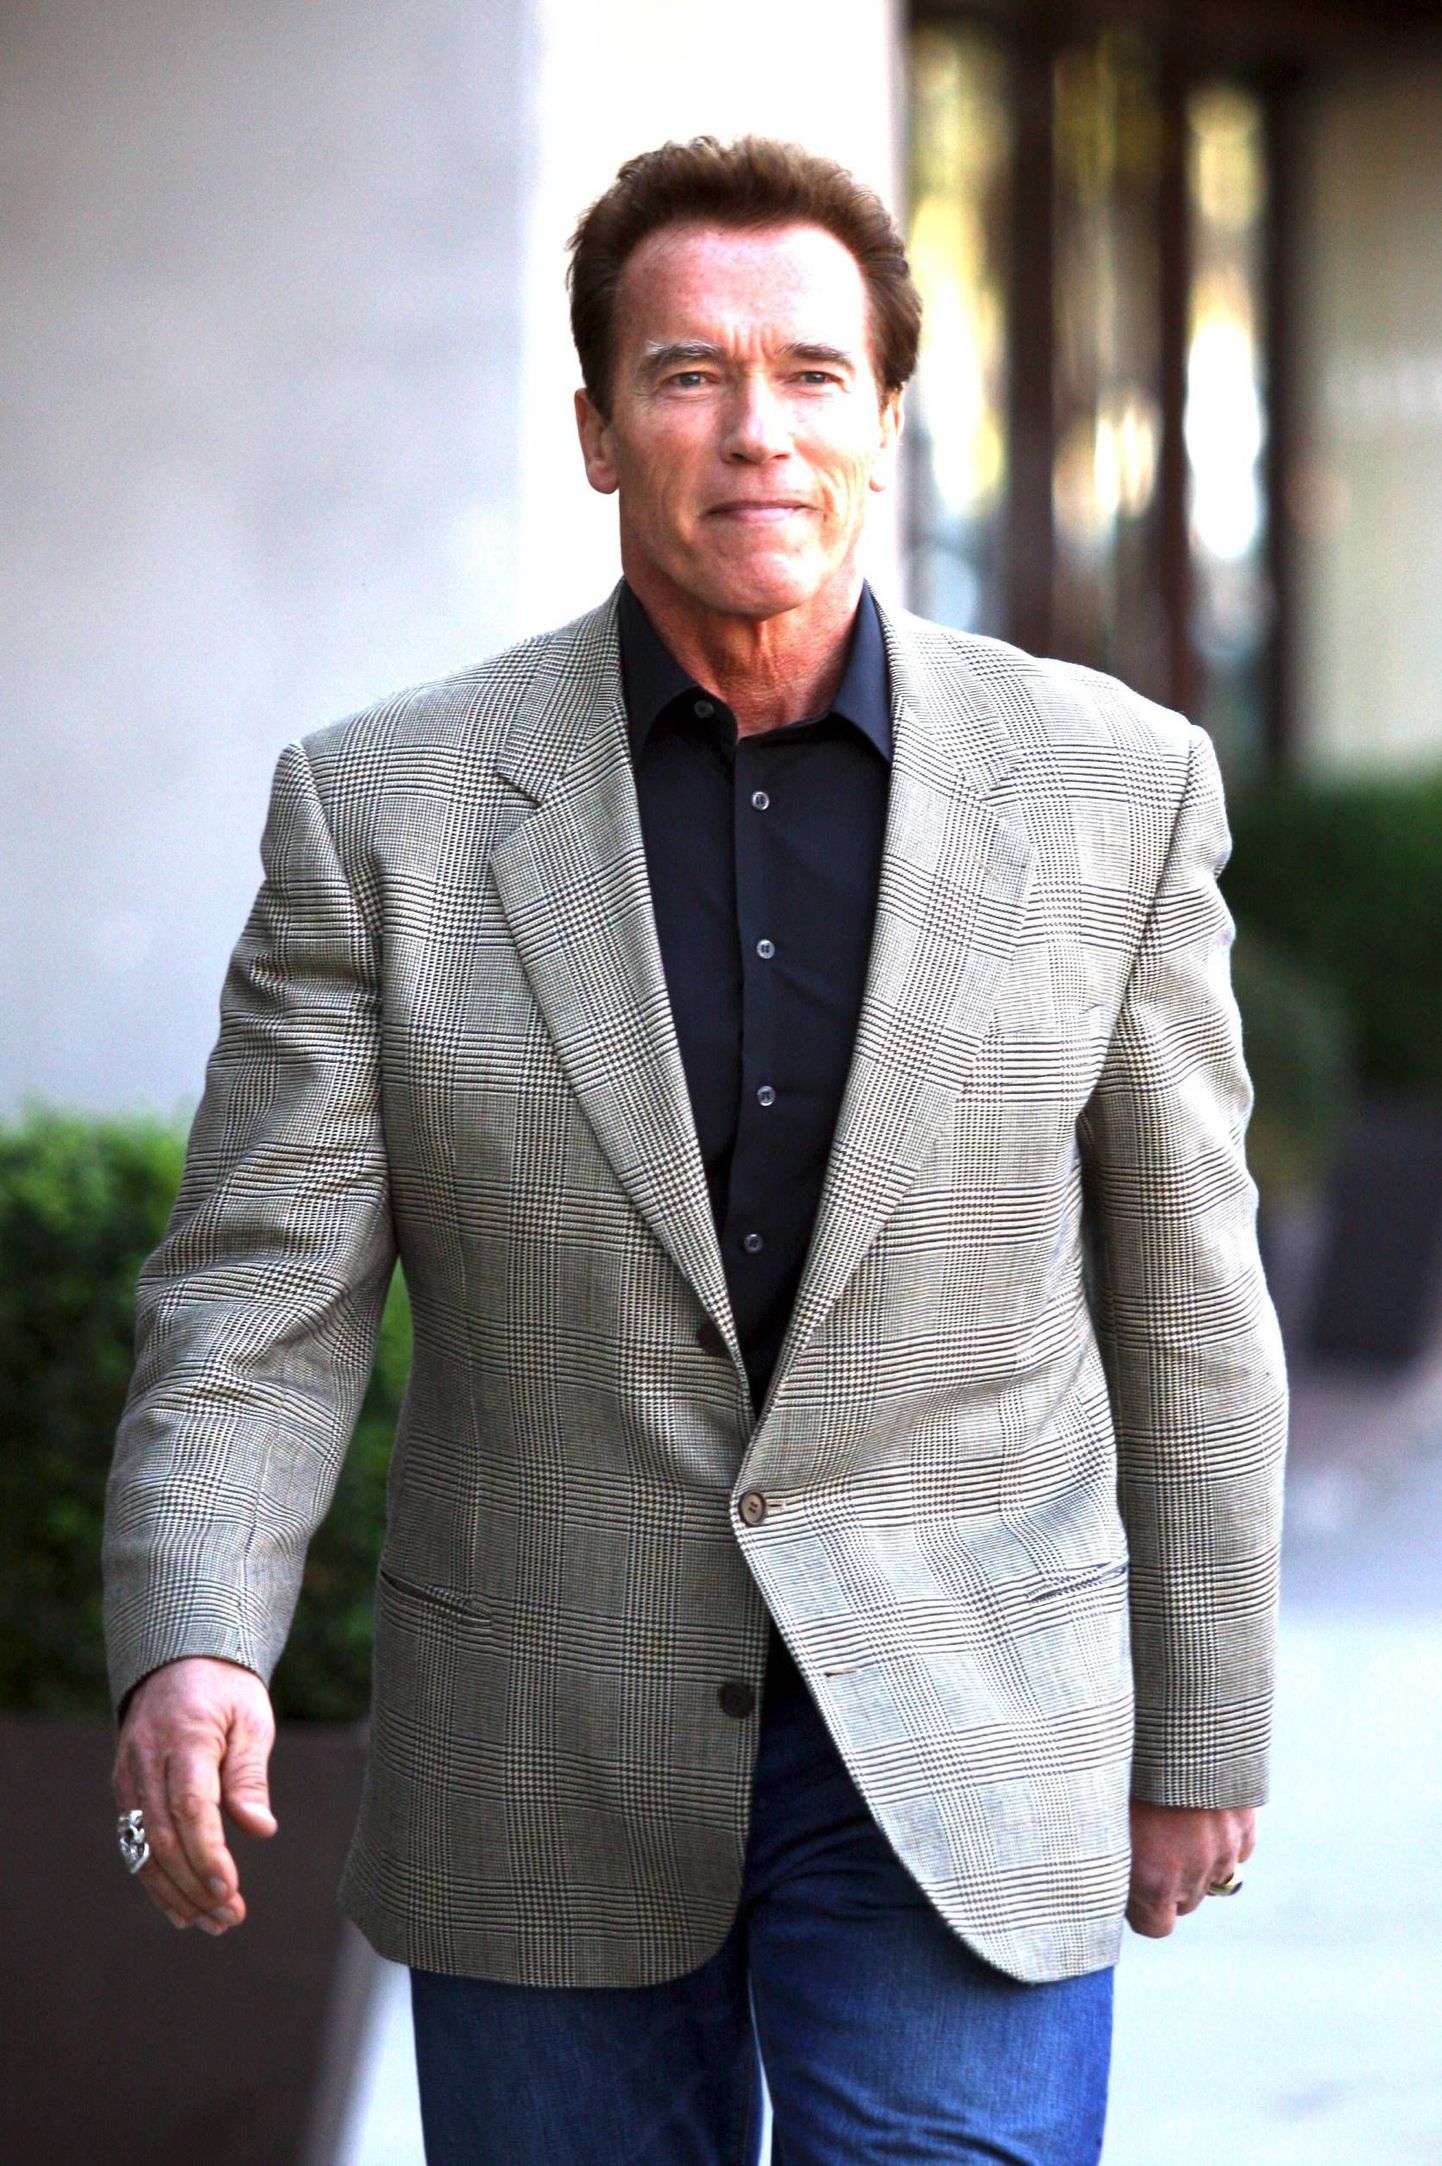 MAVRIXONLINE.COM - DAILY MAIL ONLINE OUT - Former California Governor Arnold Schwarzenegger is all smiles as he strolls after lunch in Brentwood. Schwarzenegger, who was replaced by newly elected Governor Jerry Brown on January 3, looked stress-free and happy as he headed to his SUV. Los Angeles, CA. 1/10/11.
Fees must be agreed for image use.
Byline, credit, TV usage, web usage or linkback must read MAVRIXONLINE.COM.
Failure to byline correctly will incur double the agreed fee.
Tel: 305 542 9275 or 954 698 6777.